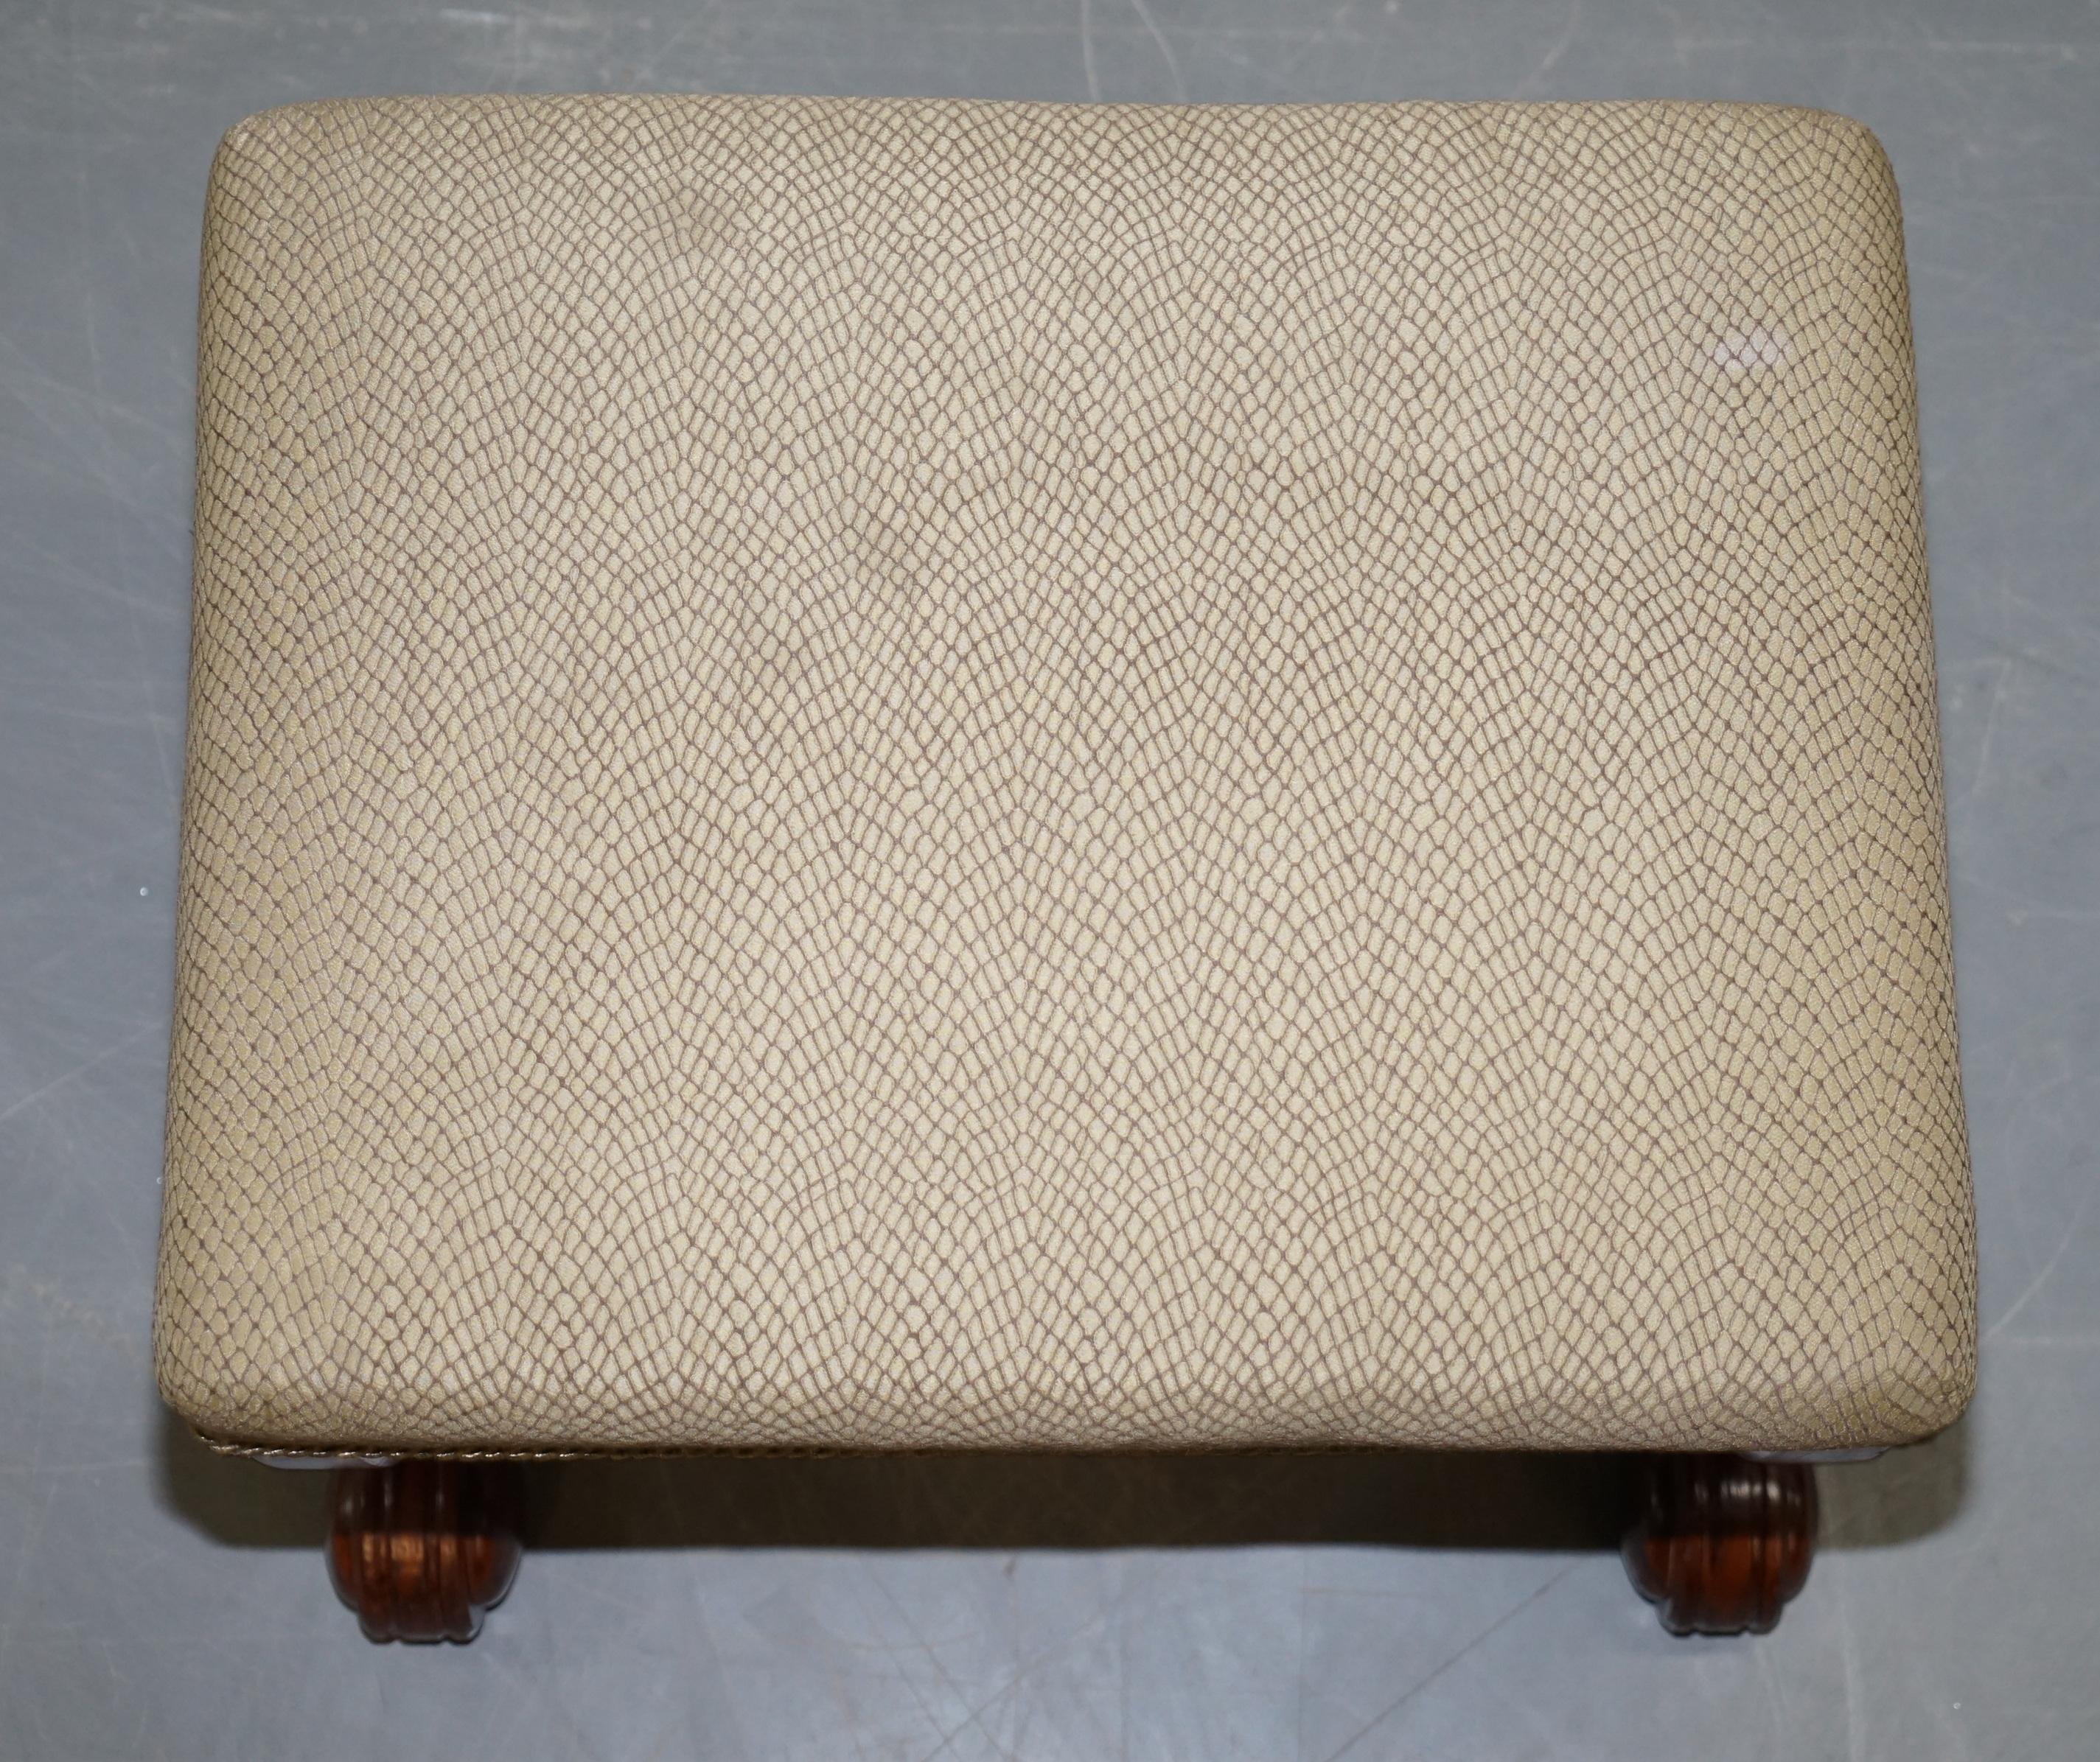 Upholstery Pair of Decorative Regency Style Ornate Large Footstools with Curvey Frames